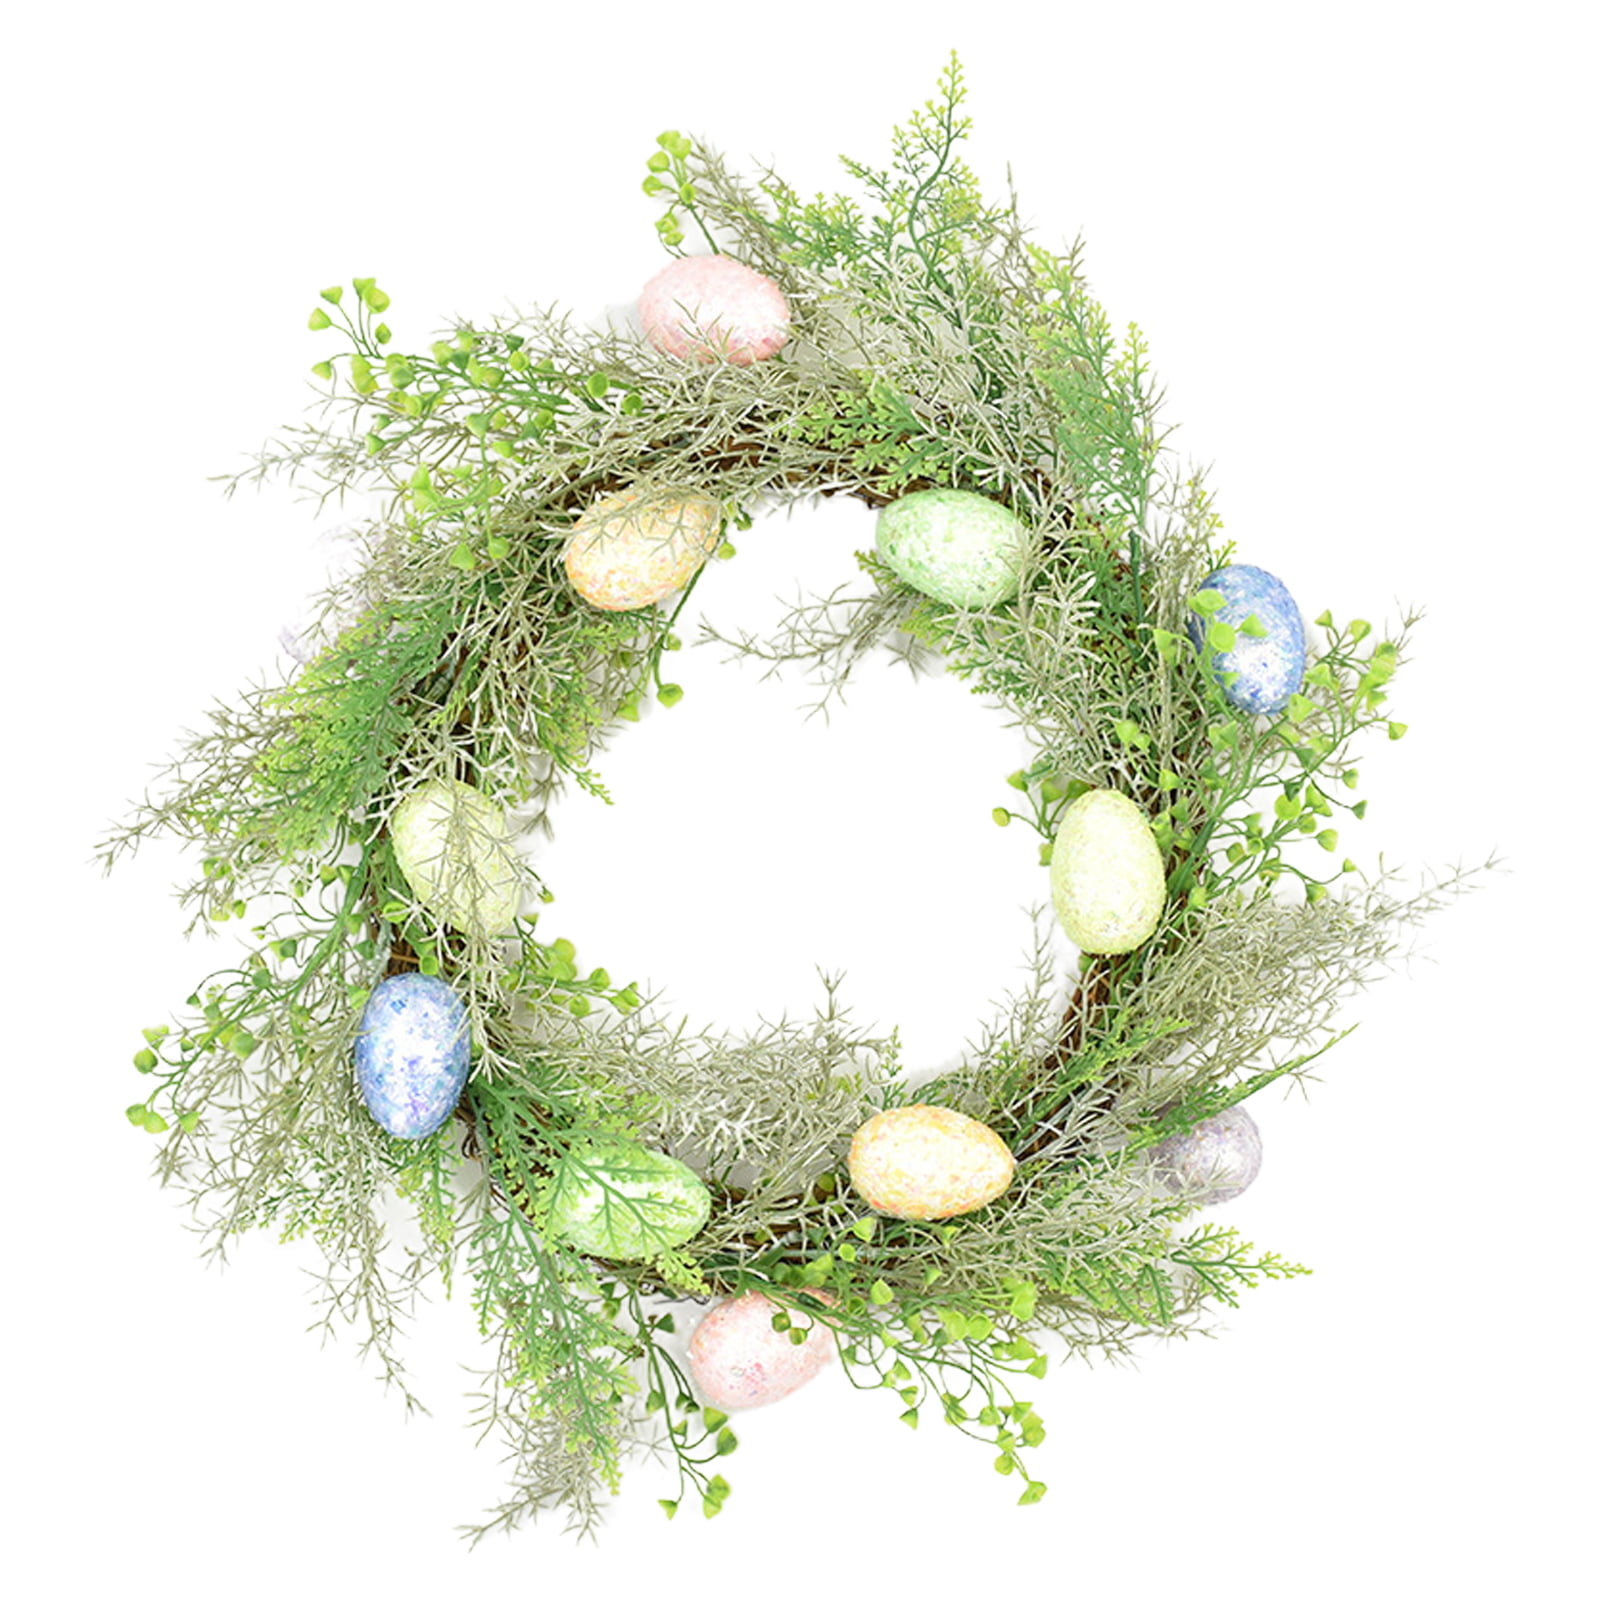 Details about   Branches Decor DIY Ornaments Easter Egg Home Painting Decoration Hanging 